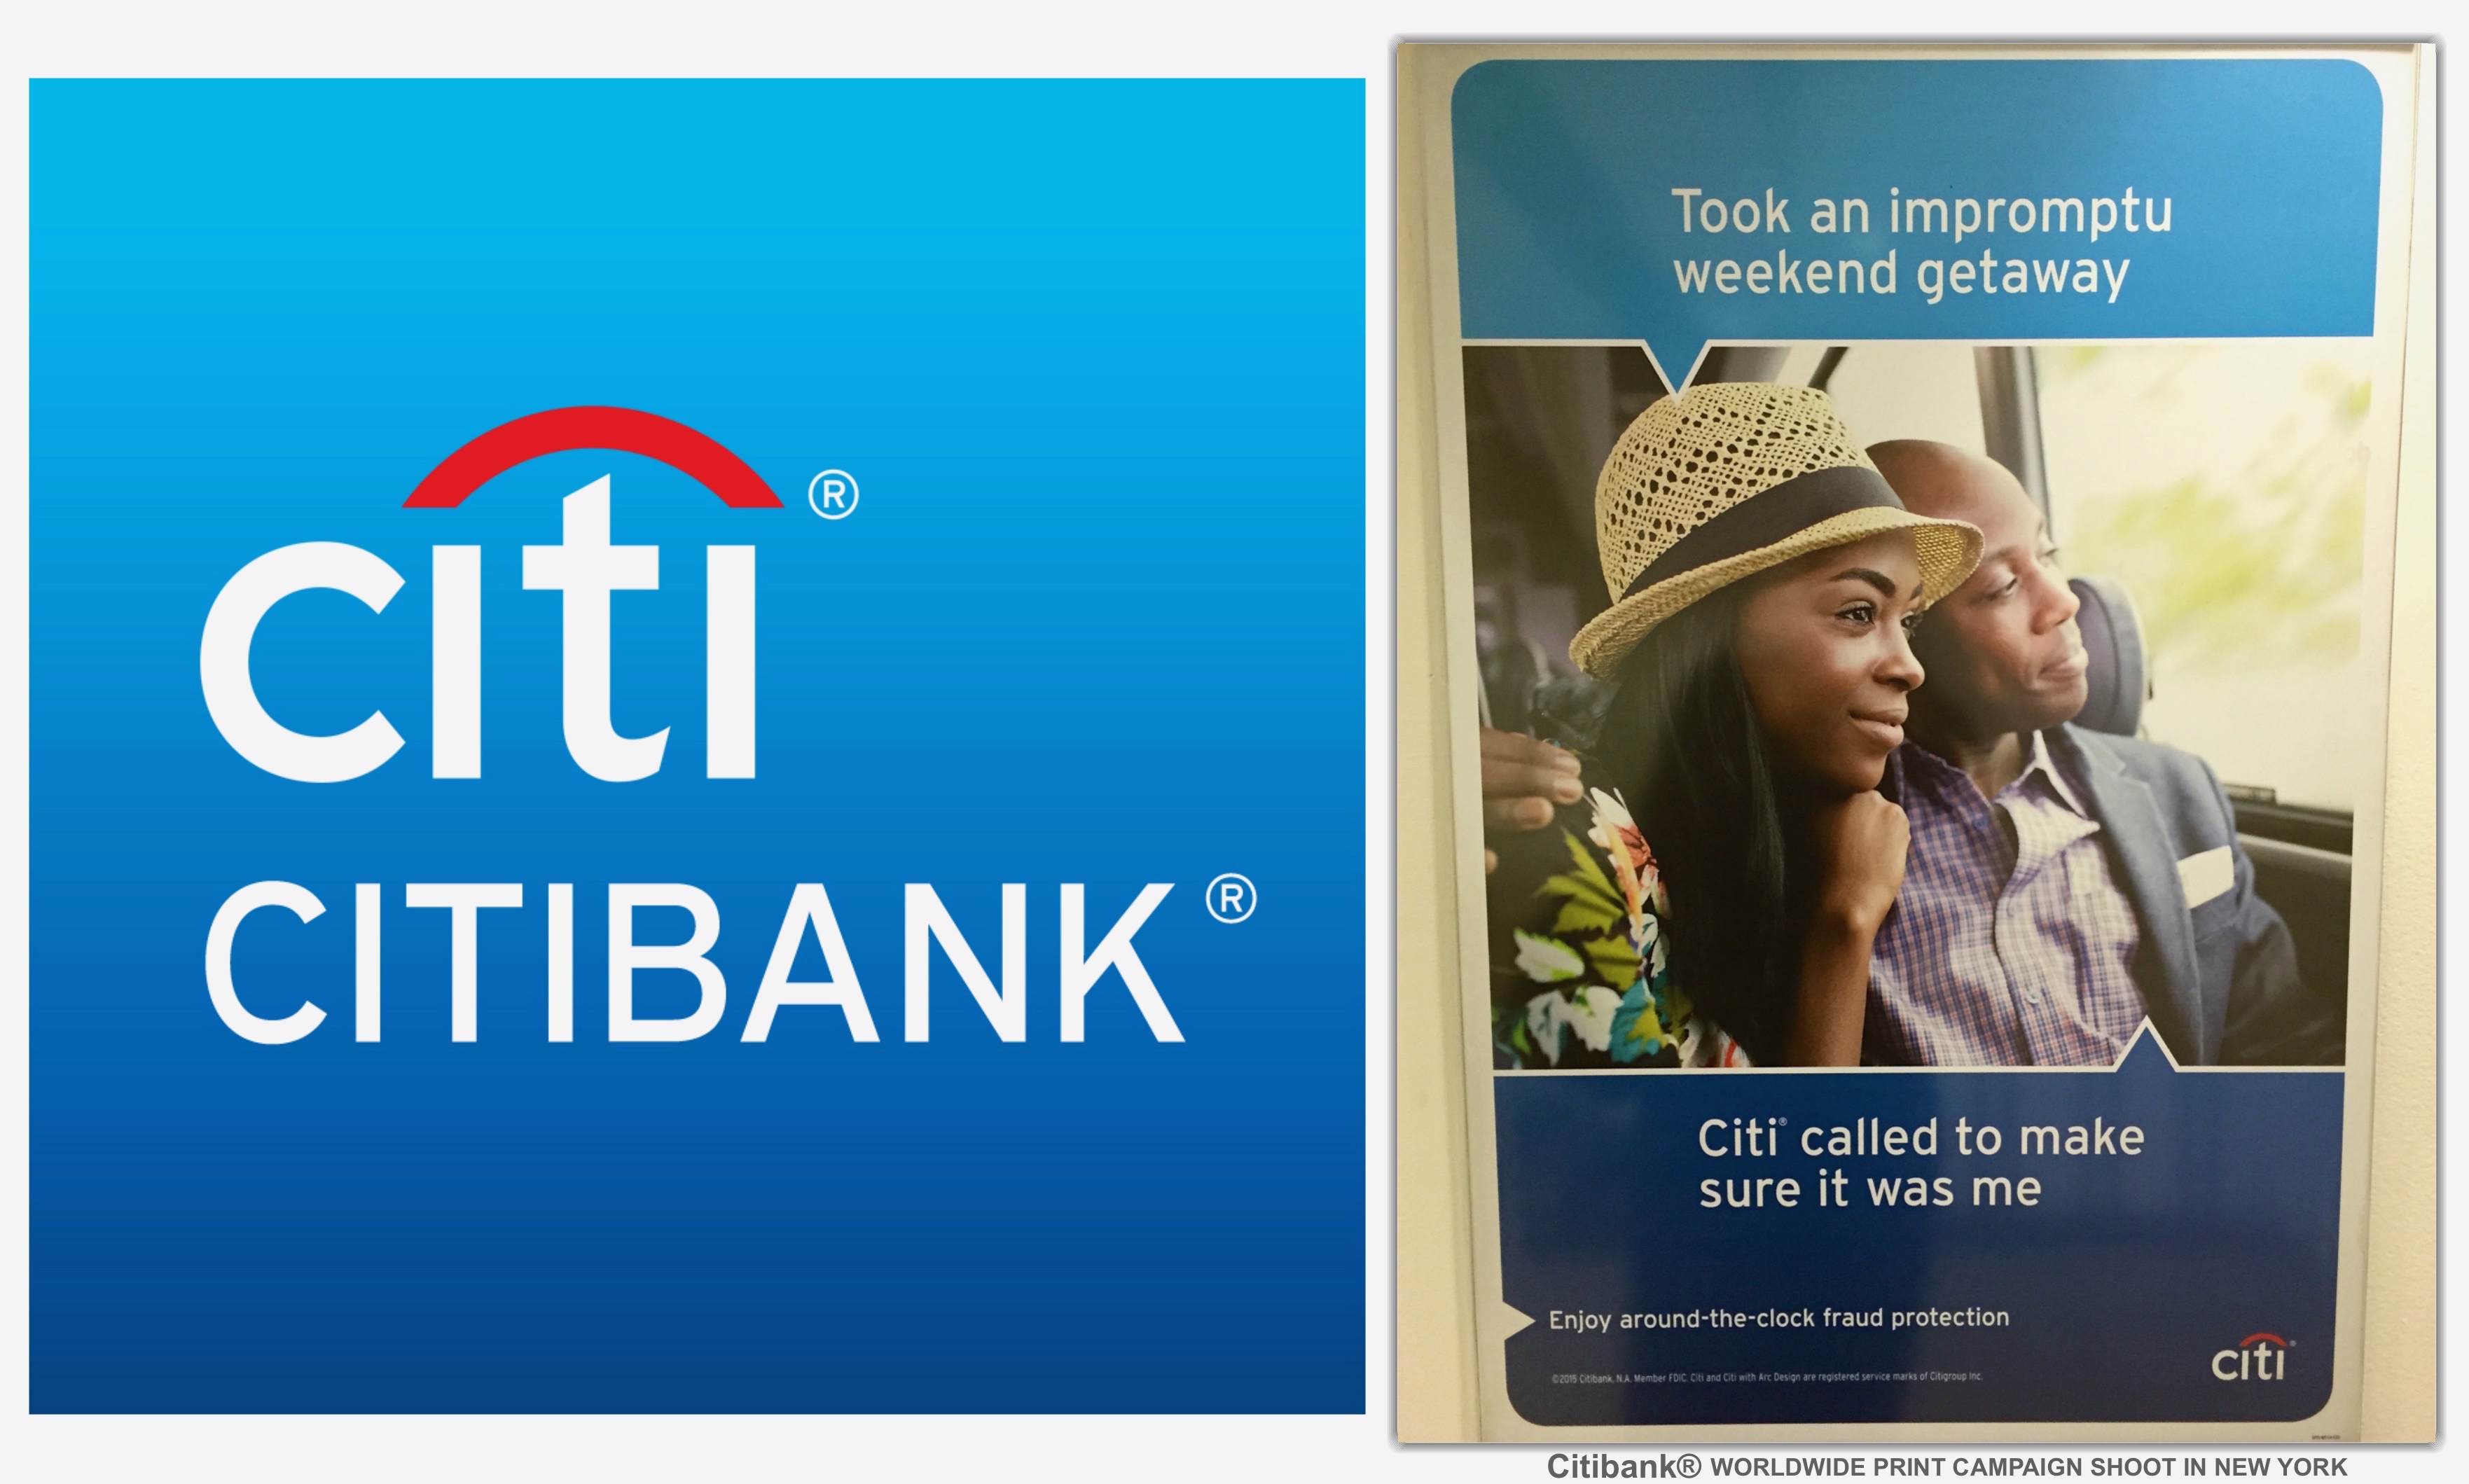 Citibank® WORLDWIDE PRINT CAMPAIGN Just Released ... https://lnkd.in/bhC4TJ8 (New York City shoot)